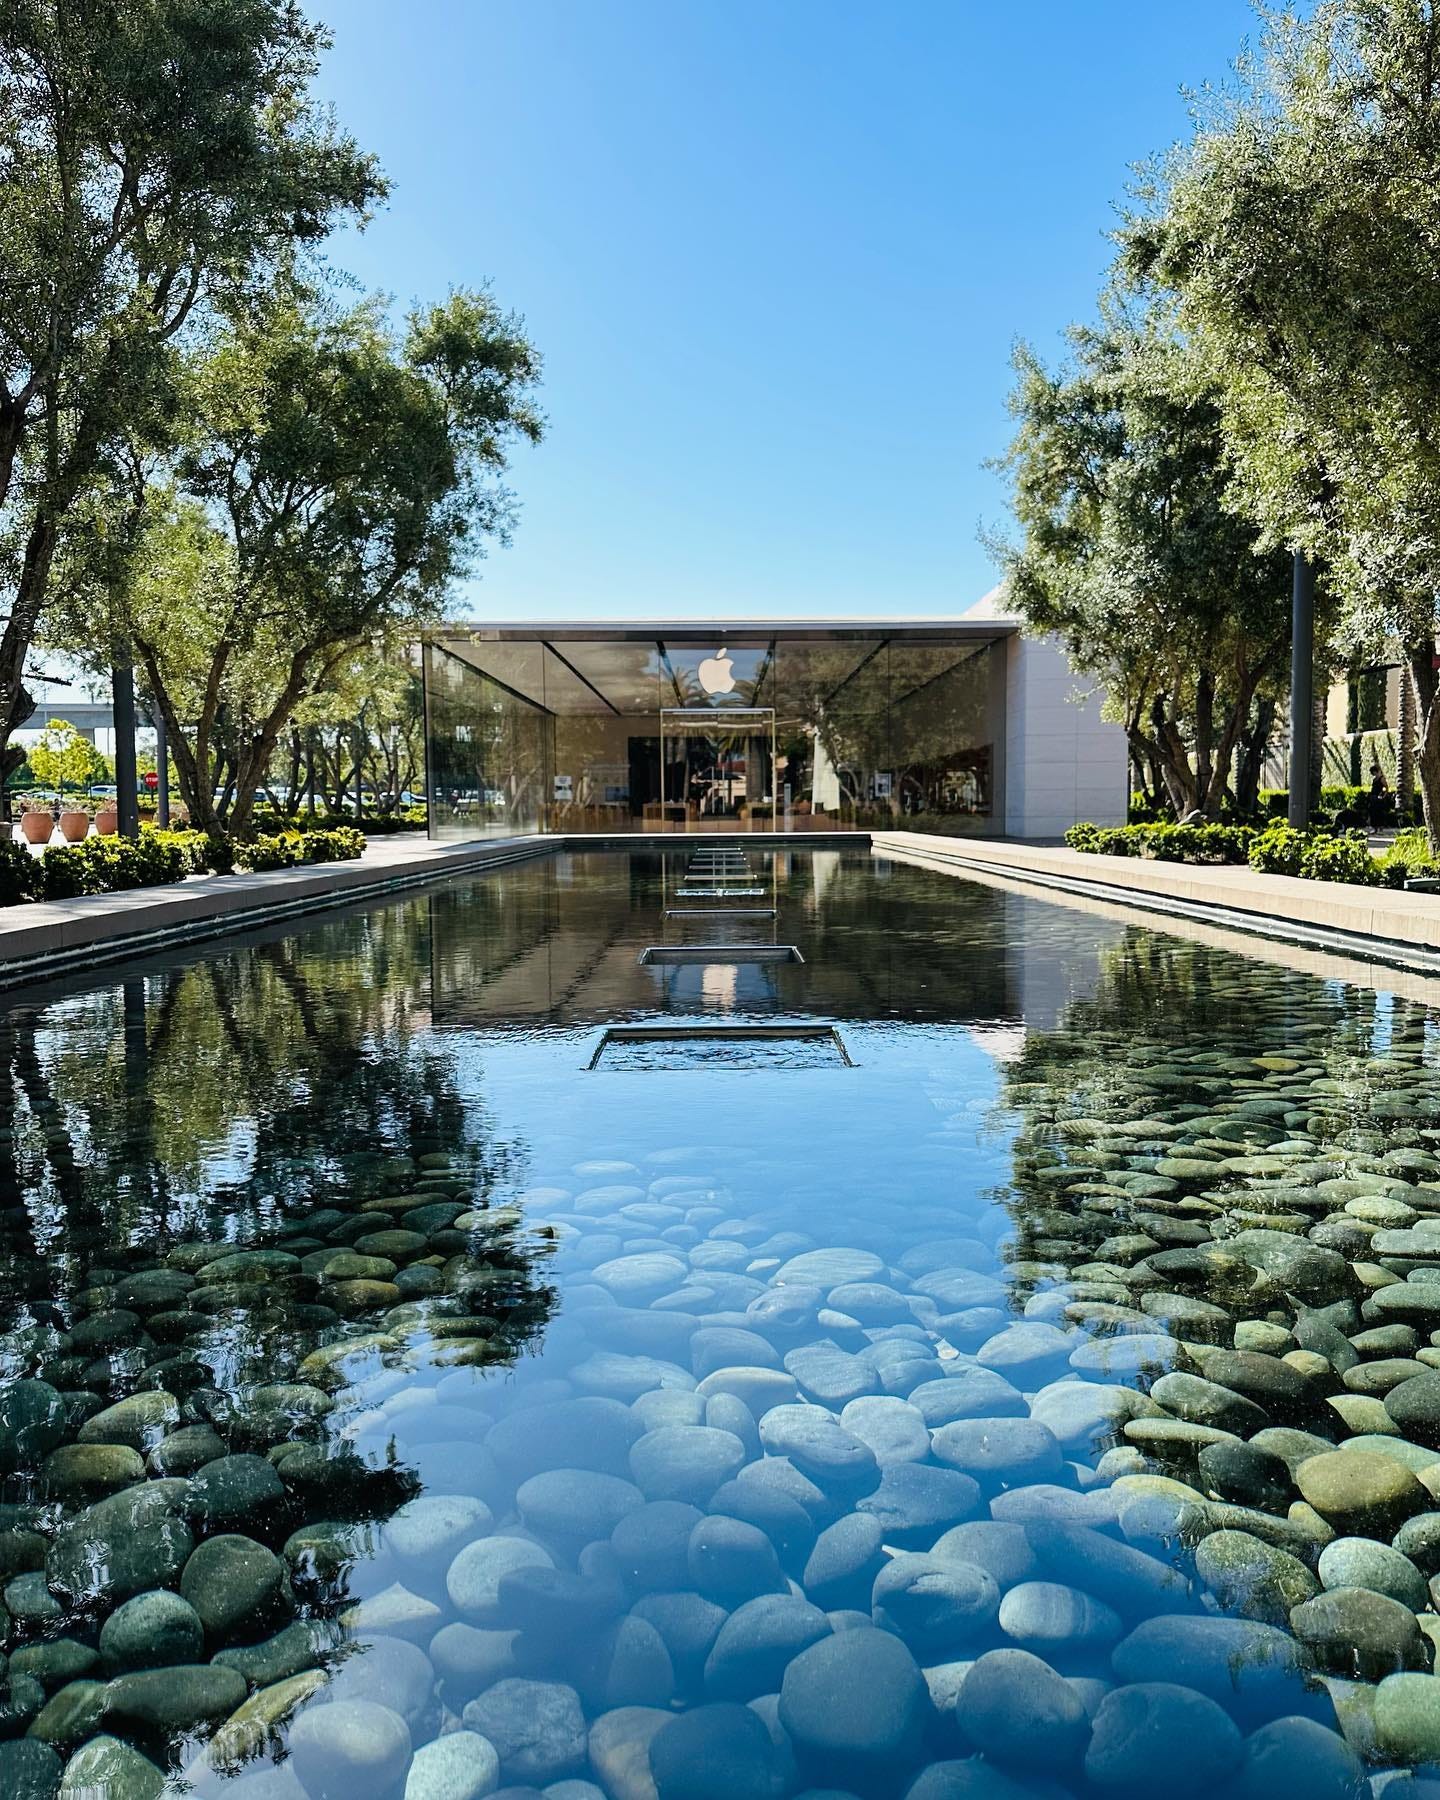 A long decorative fountain reflects the entrance to Apple Irvine Spectrum Center.